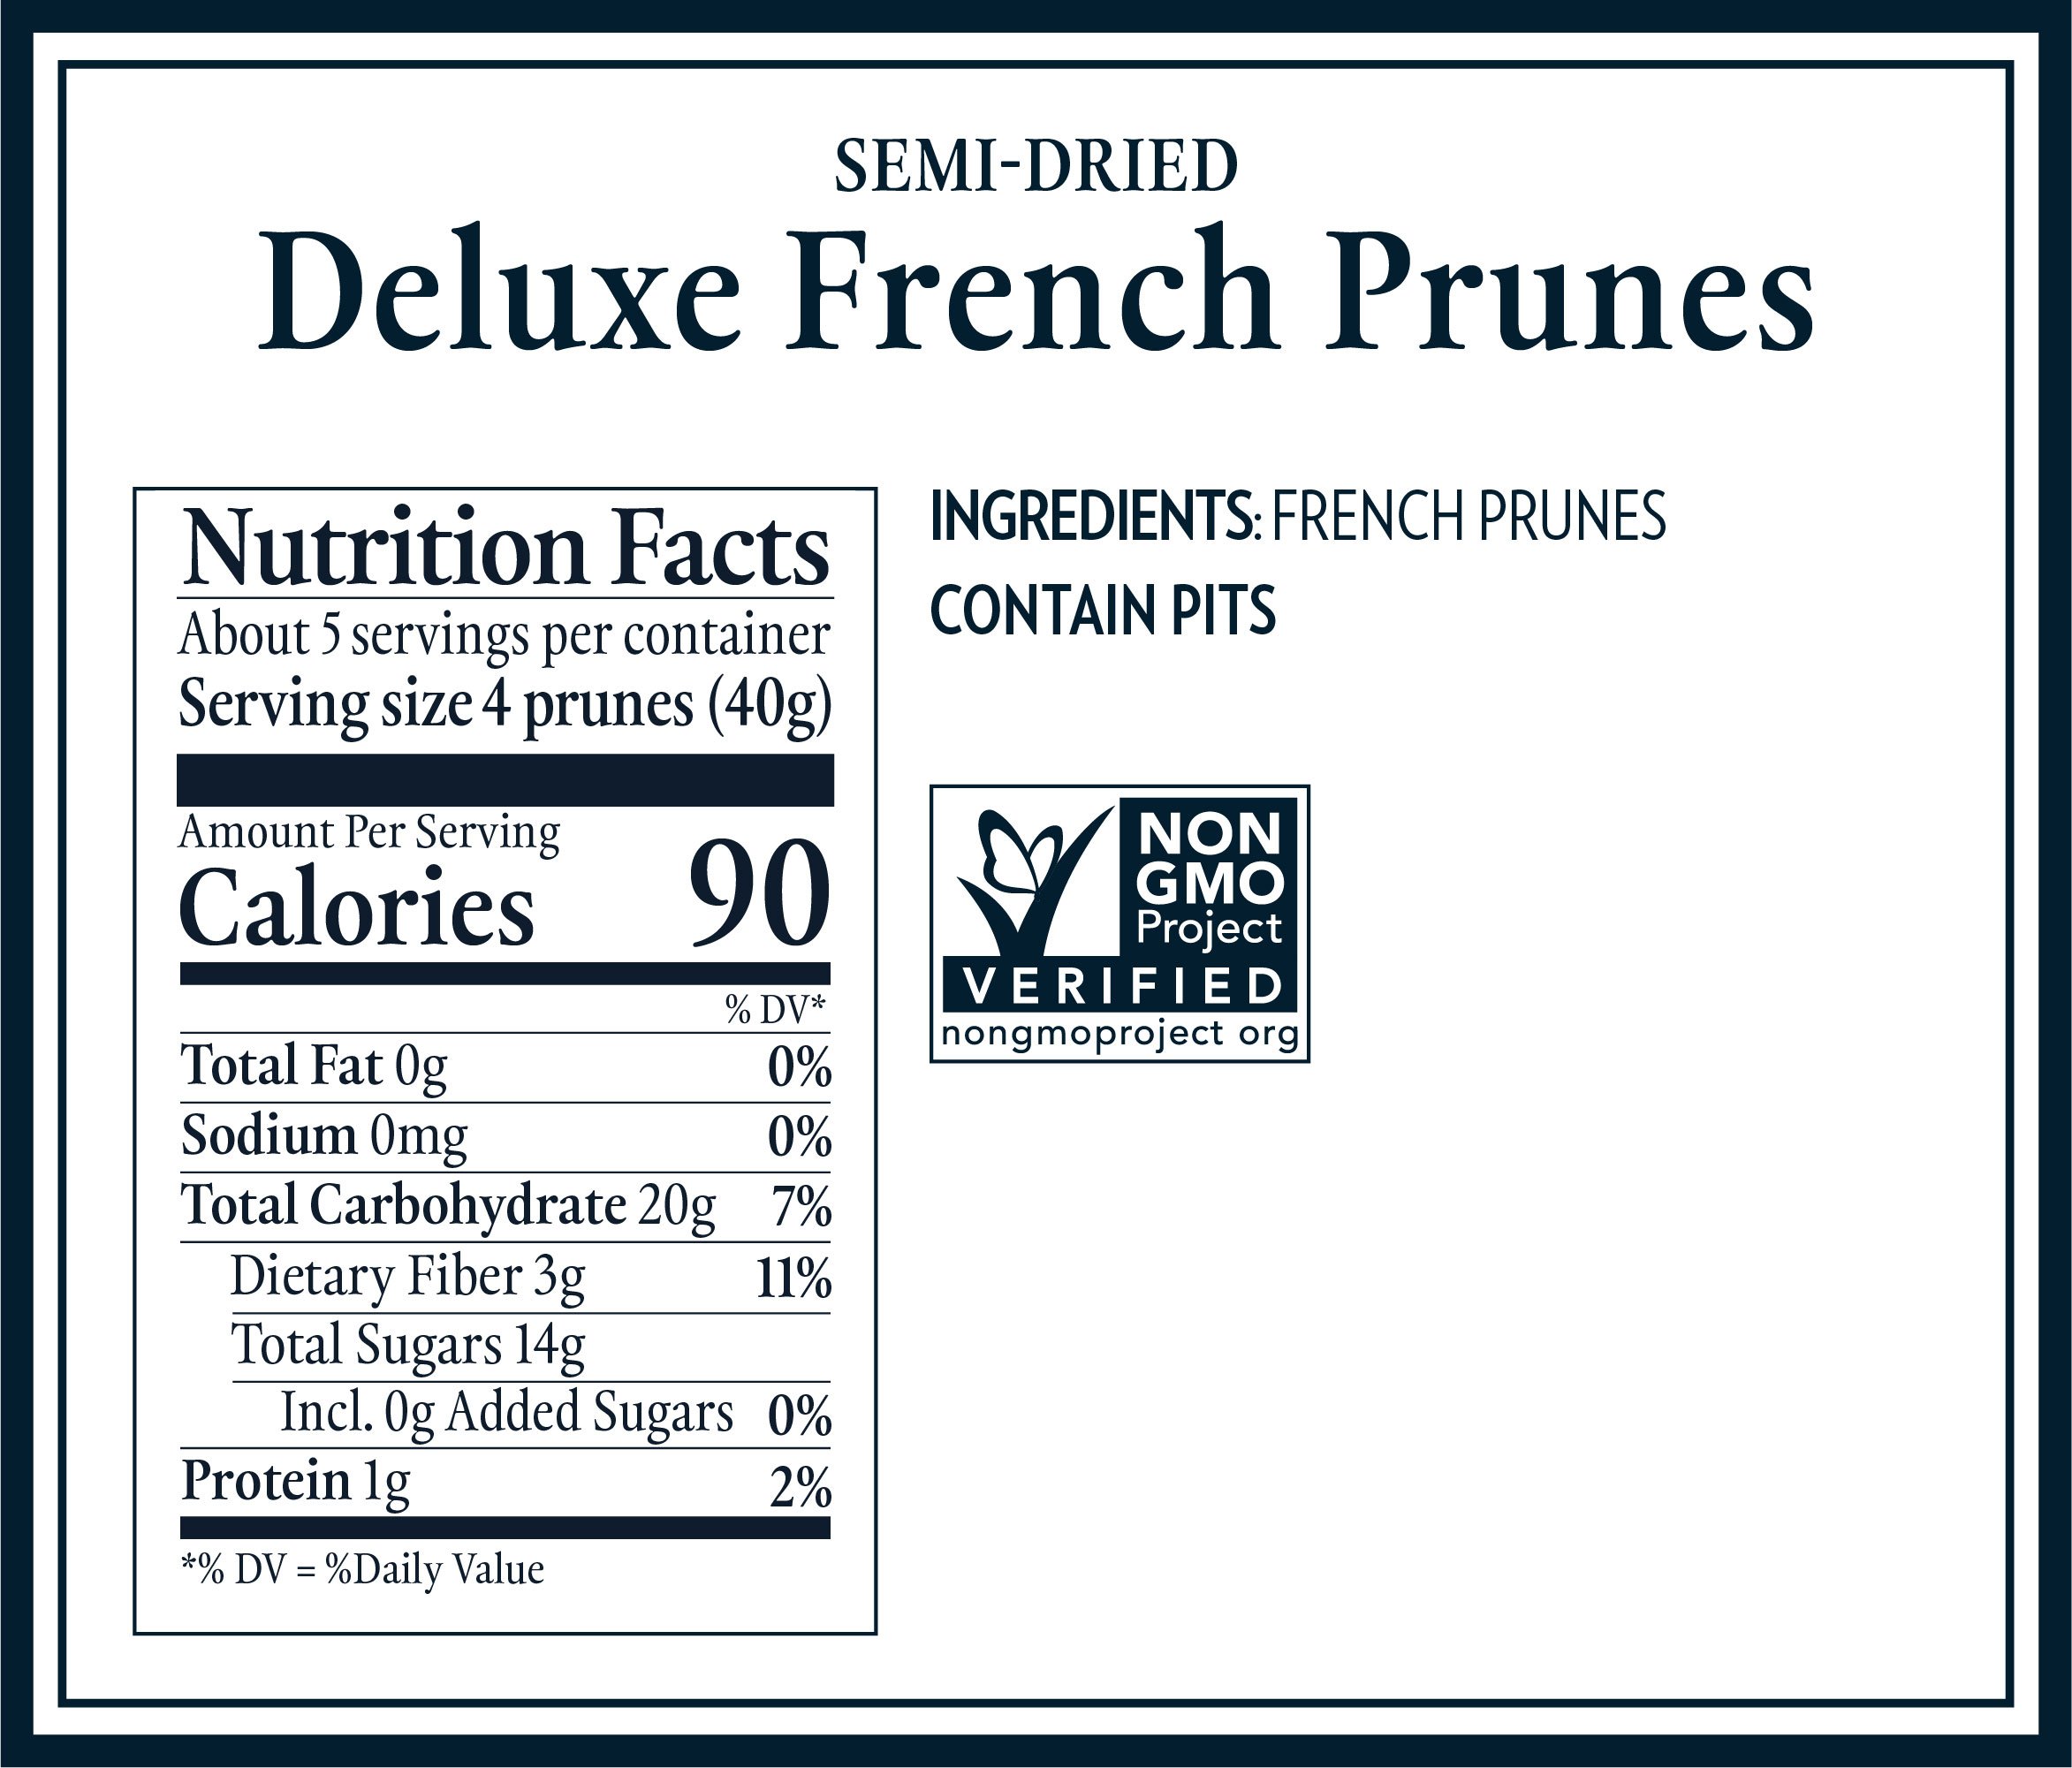 Nutrition Tables_semi-dried fruit_deluxe french prunes-1